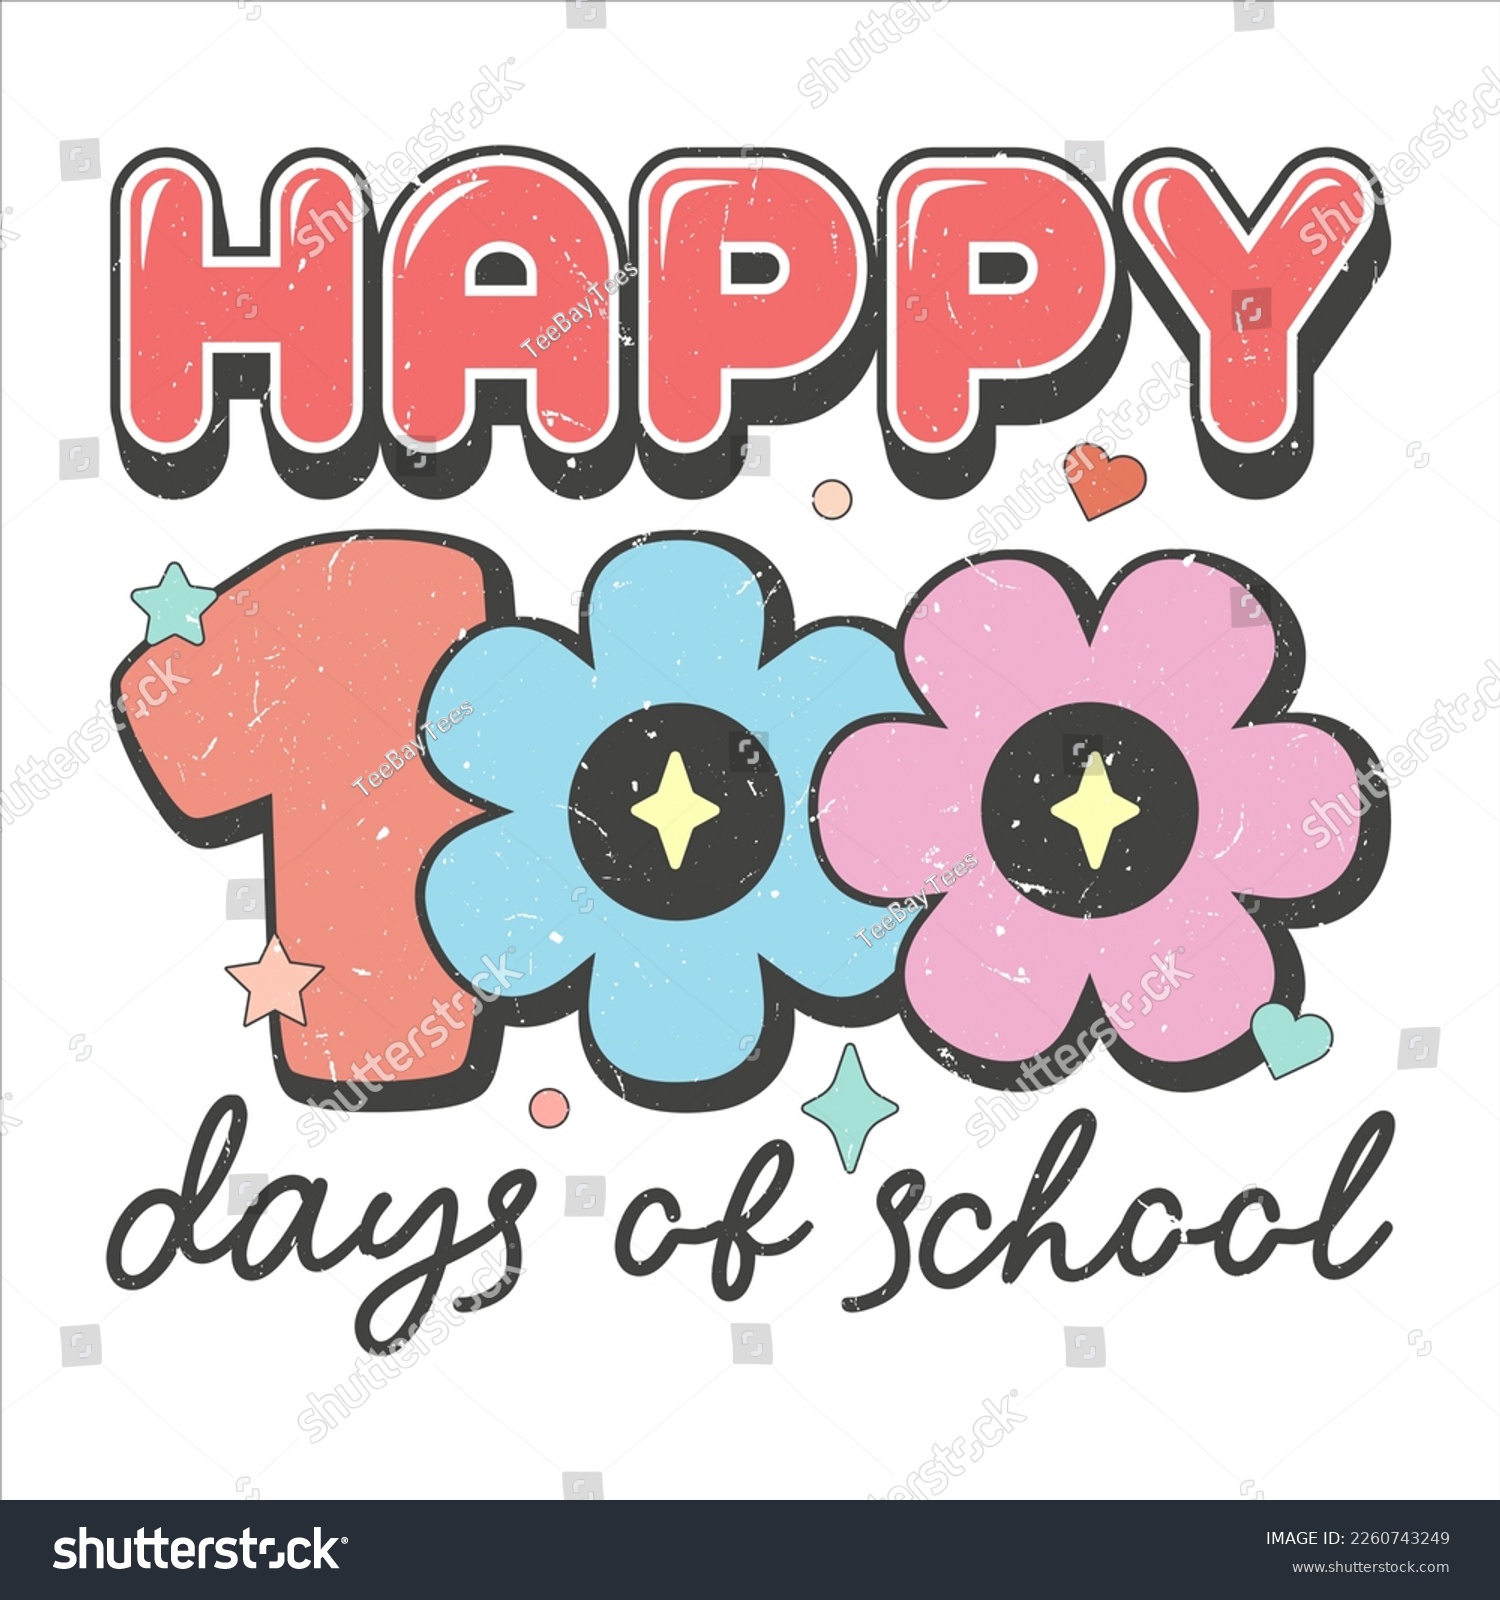 SVG of Happy 100 Days of School, Celebrate your 100 Smarter days in Class with this adorable and fun design including Colorful Flower. Perfect Design  for student, teacher, or staff. svg